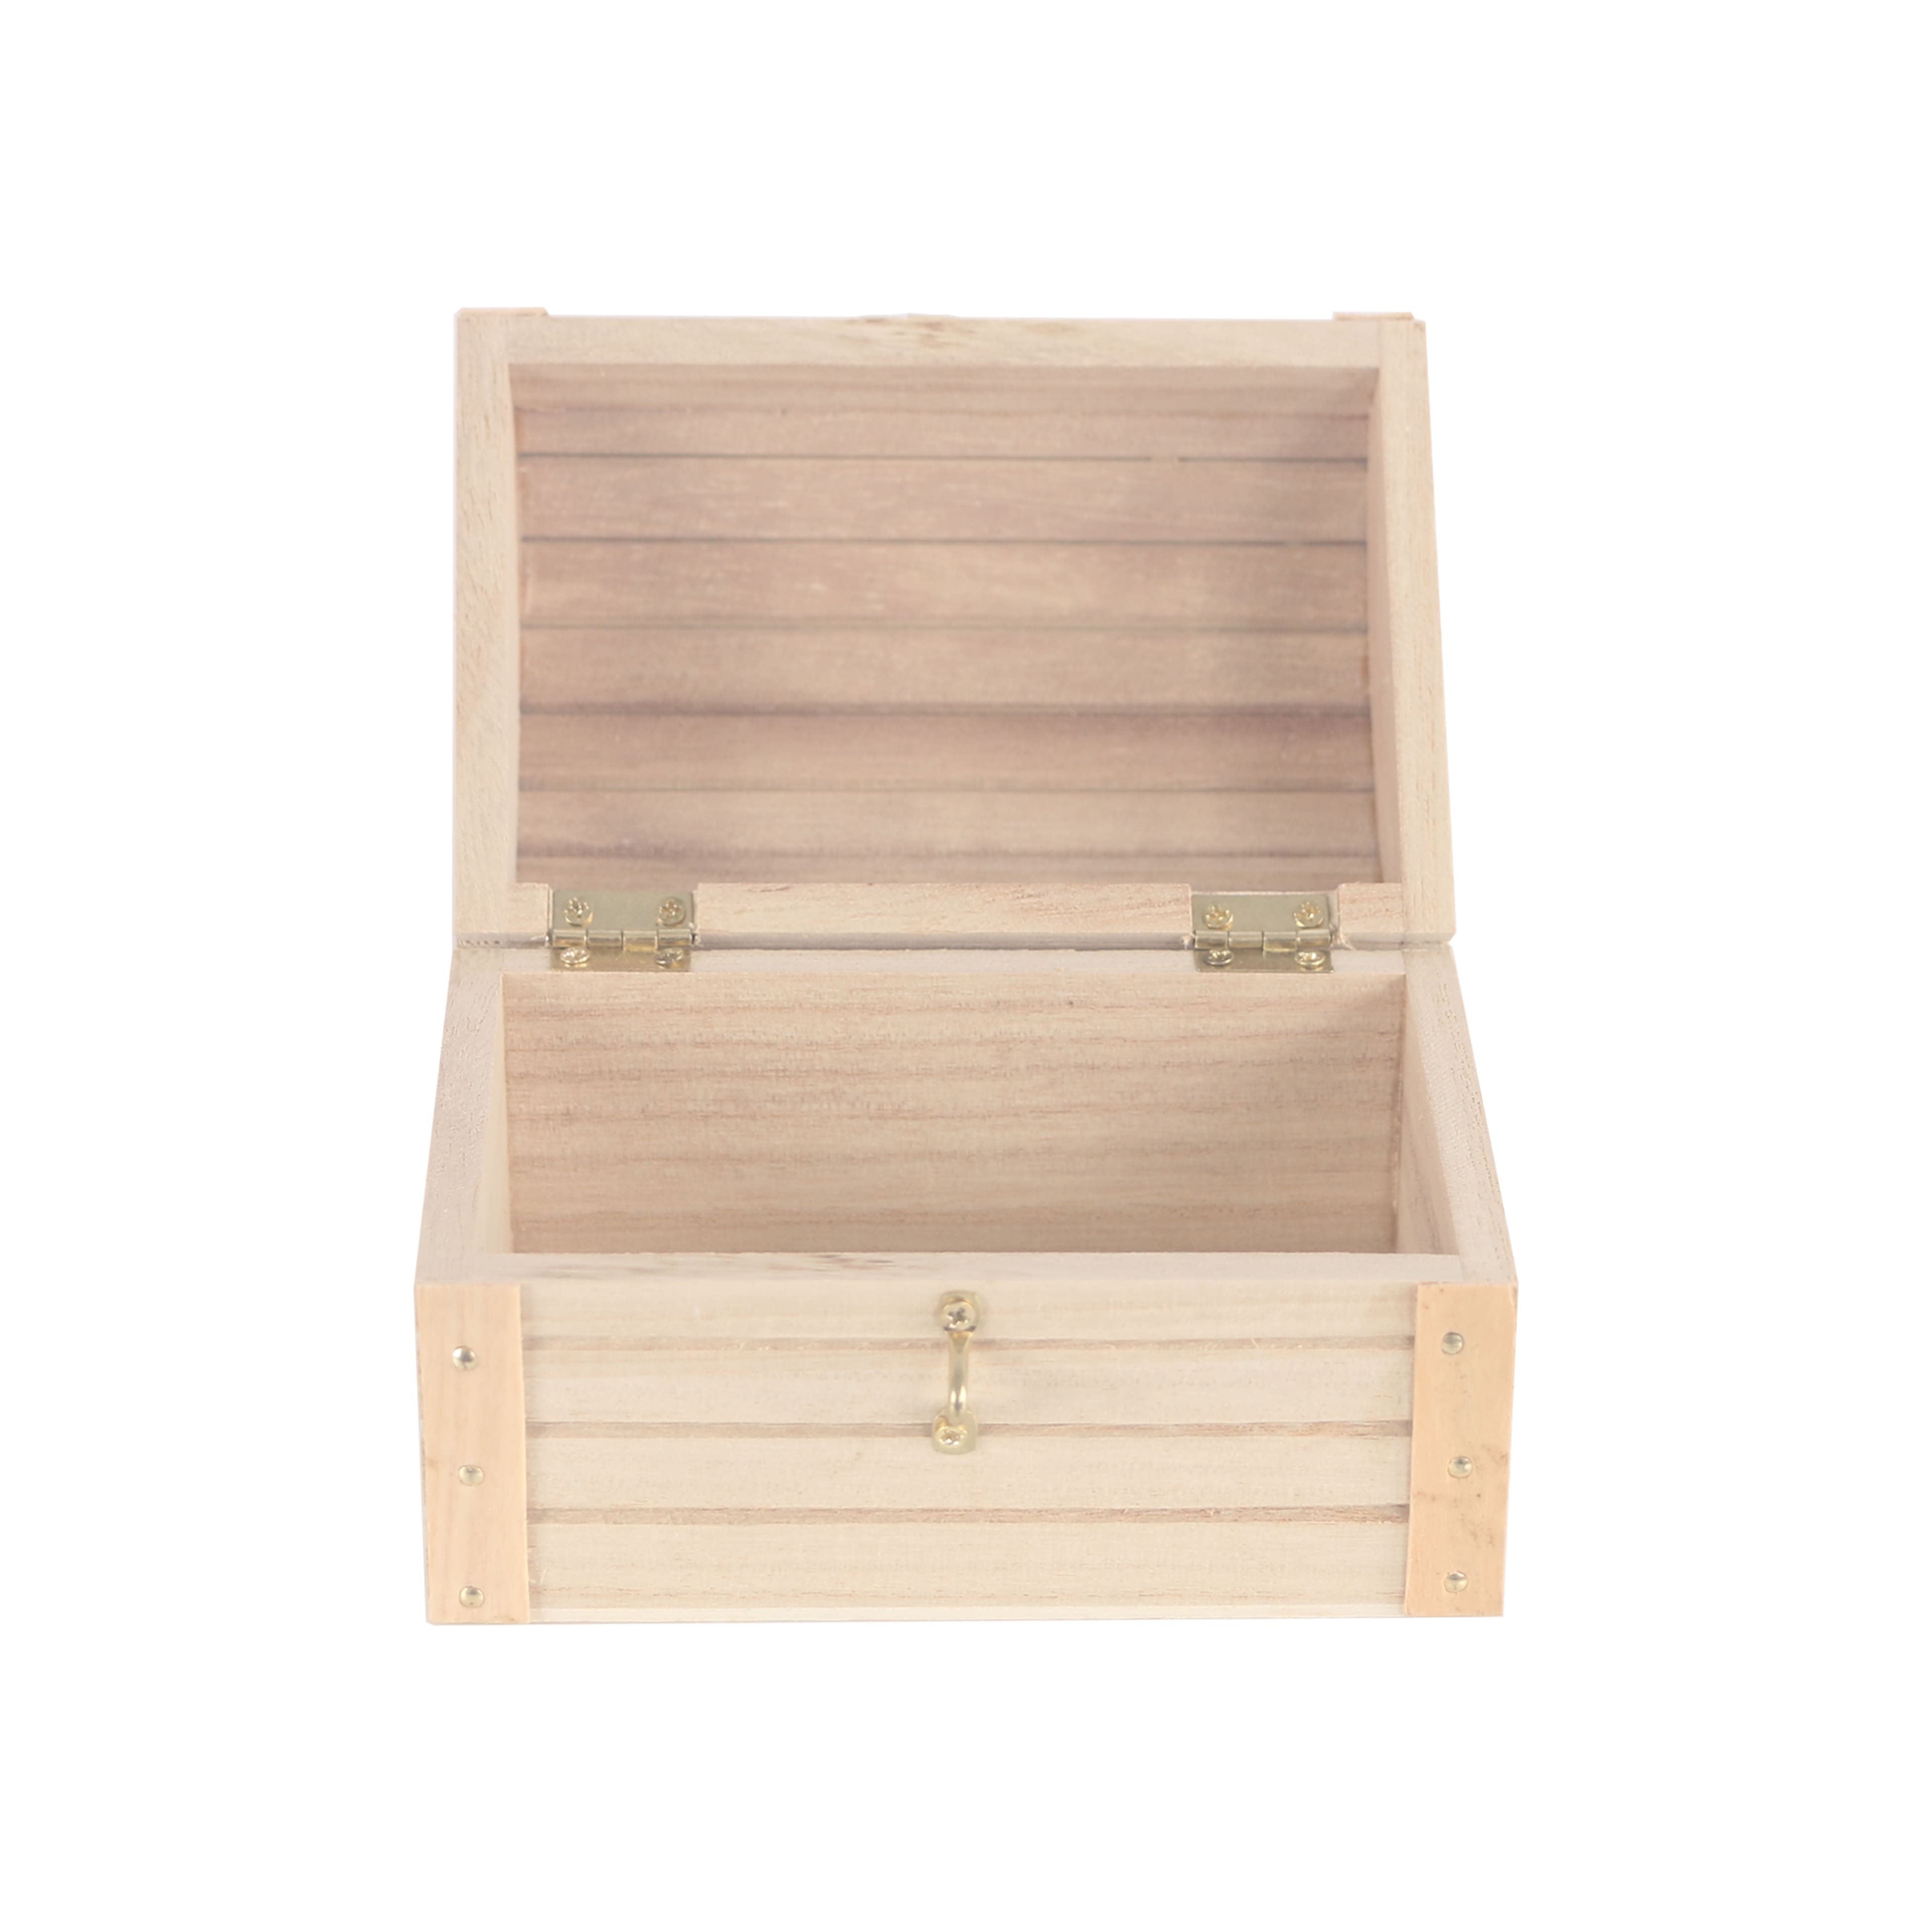 5 Wood Treasure Chest by Make Market®